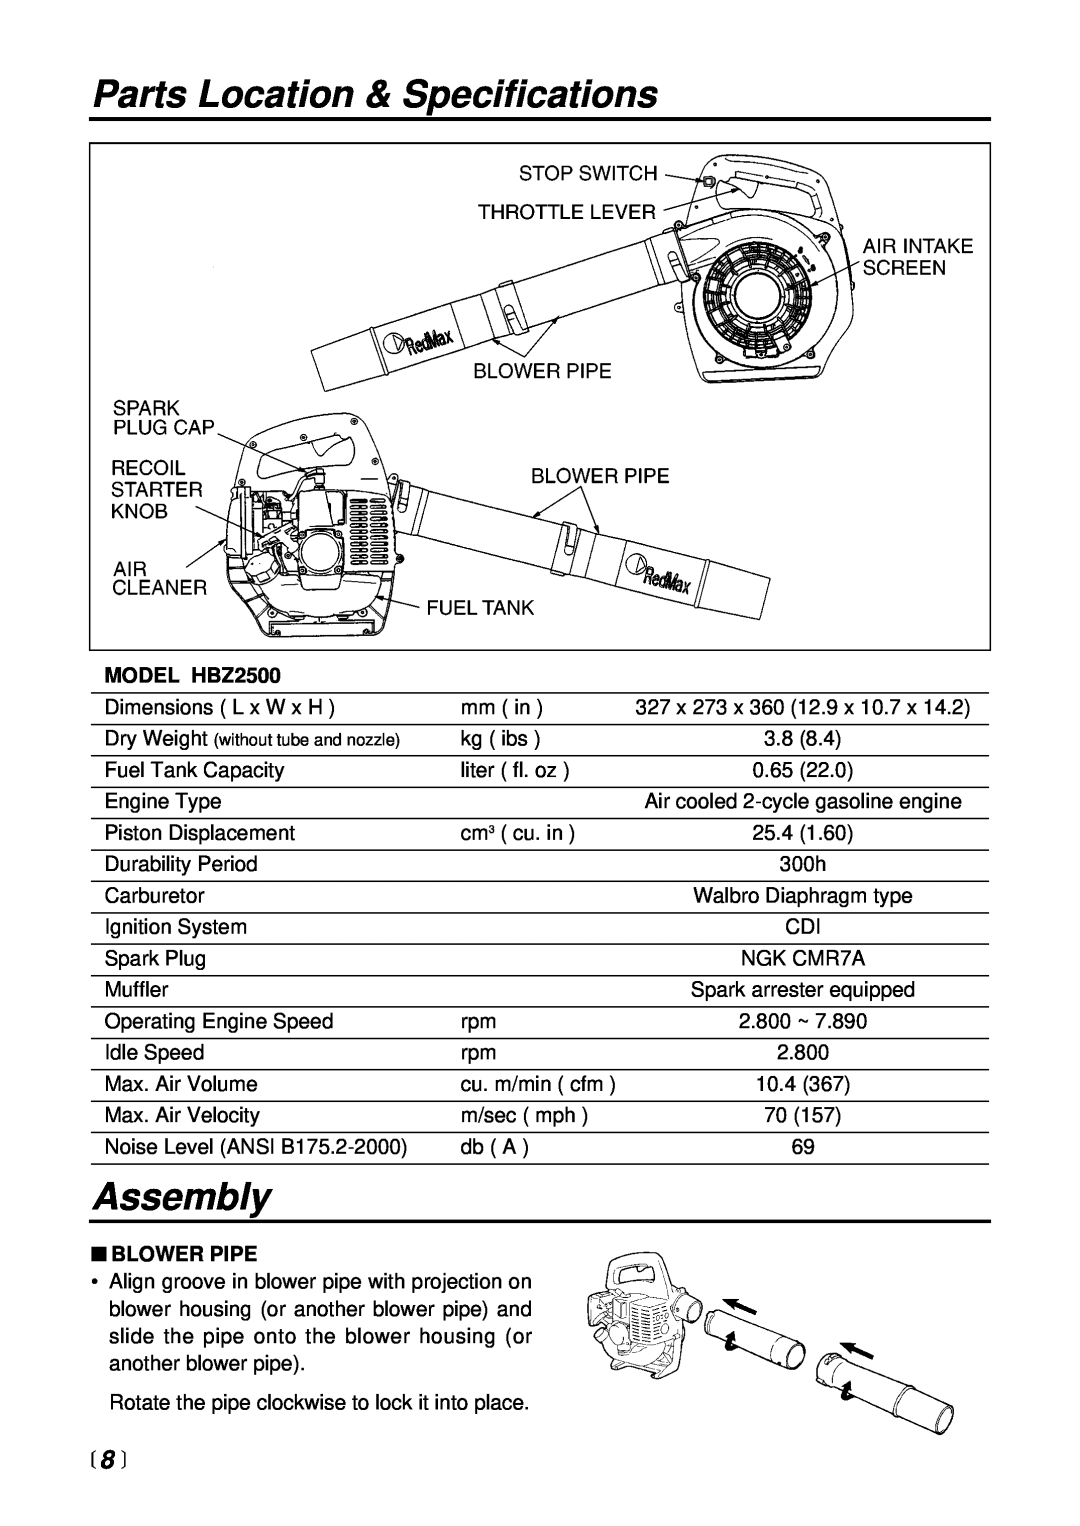 RedMax manual Parts Location & Specifications, Assembly,  8 , MODEL HBZ2500, Blower Pipe 